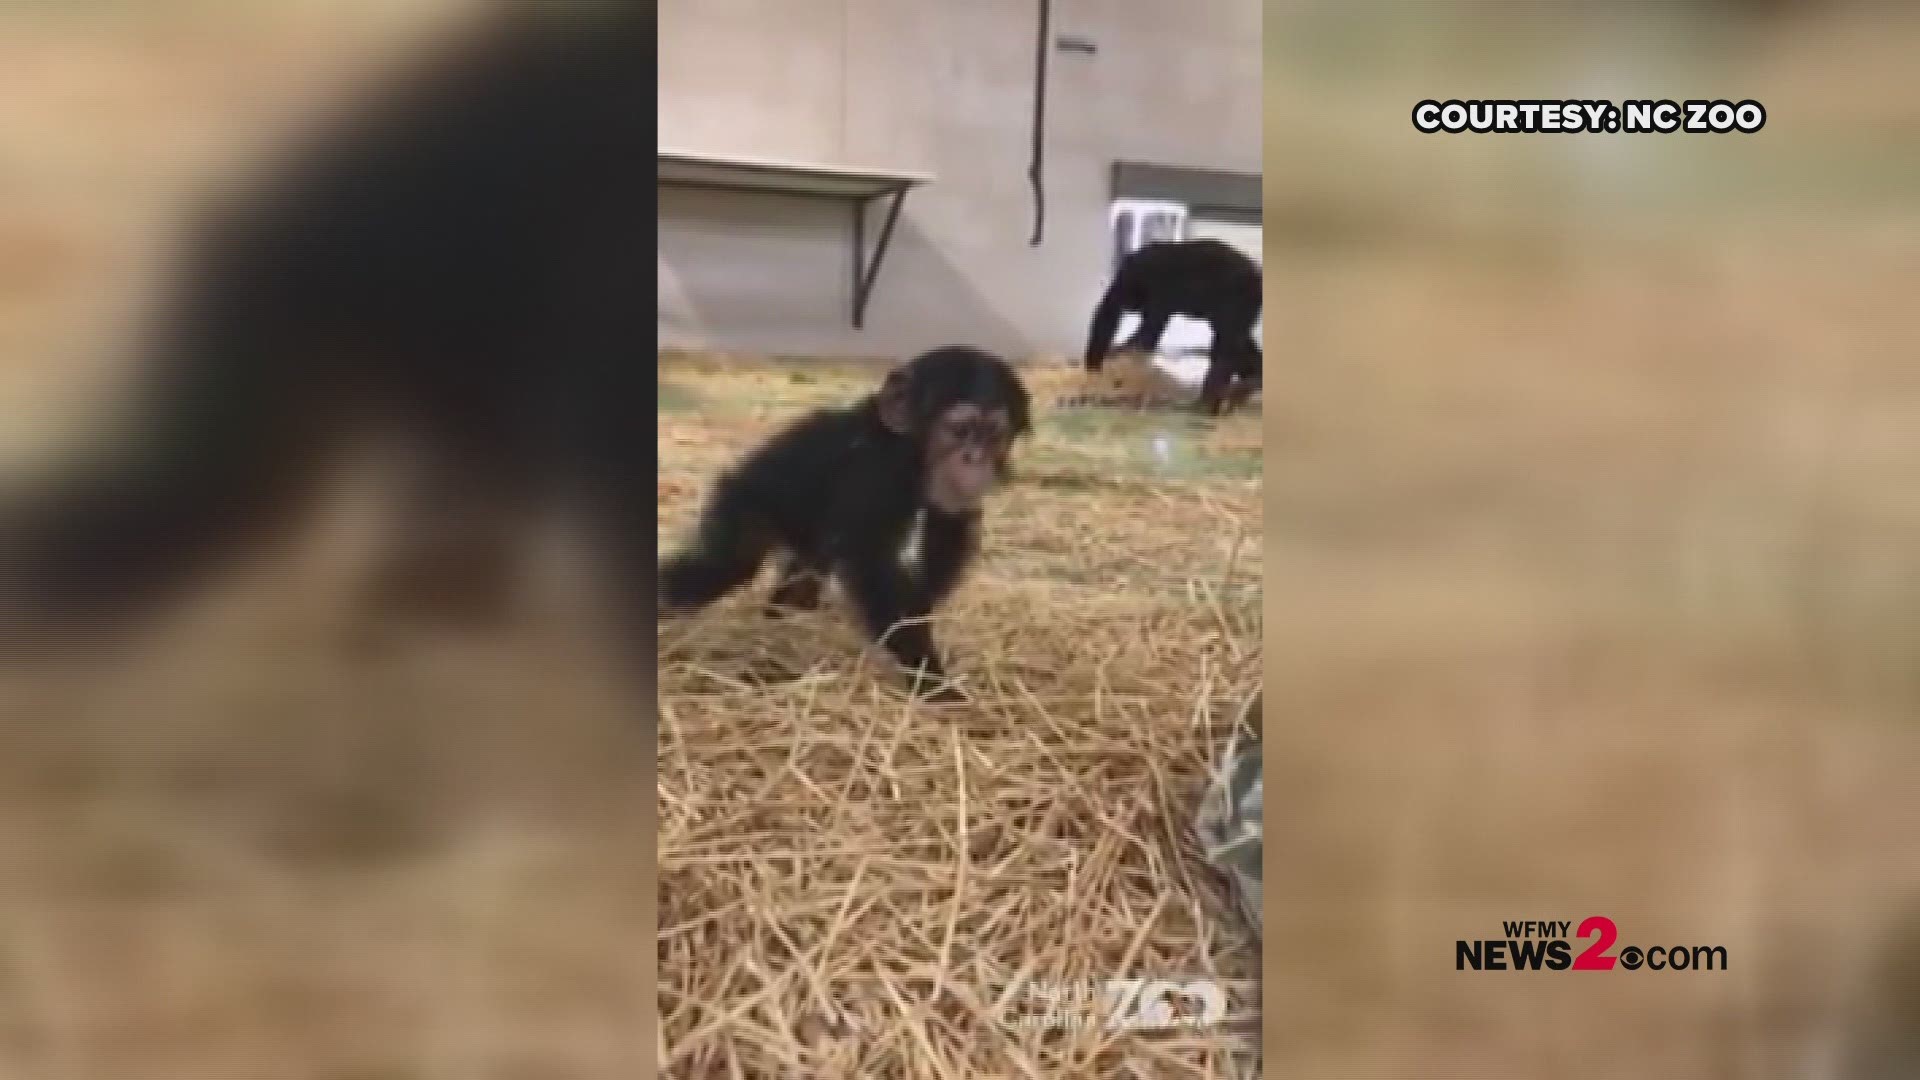 Look at him go! North Carolina Zoo says Obi, their baby chimpanzee, just turned 6 months old, and he is on the move! The zoo says Obi is gaining more independence and learning to walk on his own. Of course, his mom Gerre is always close by to keep an eye on him.